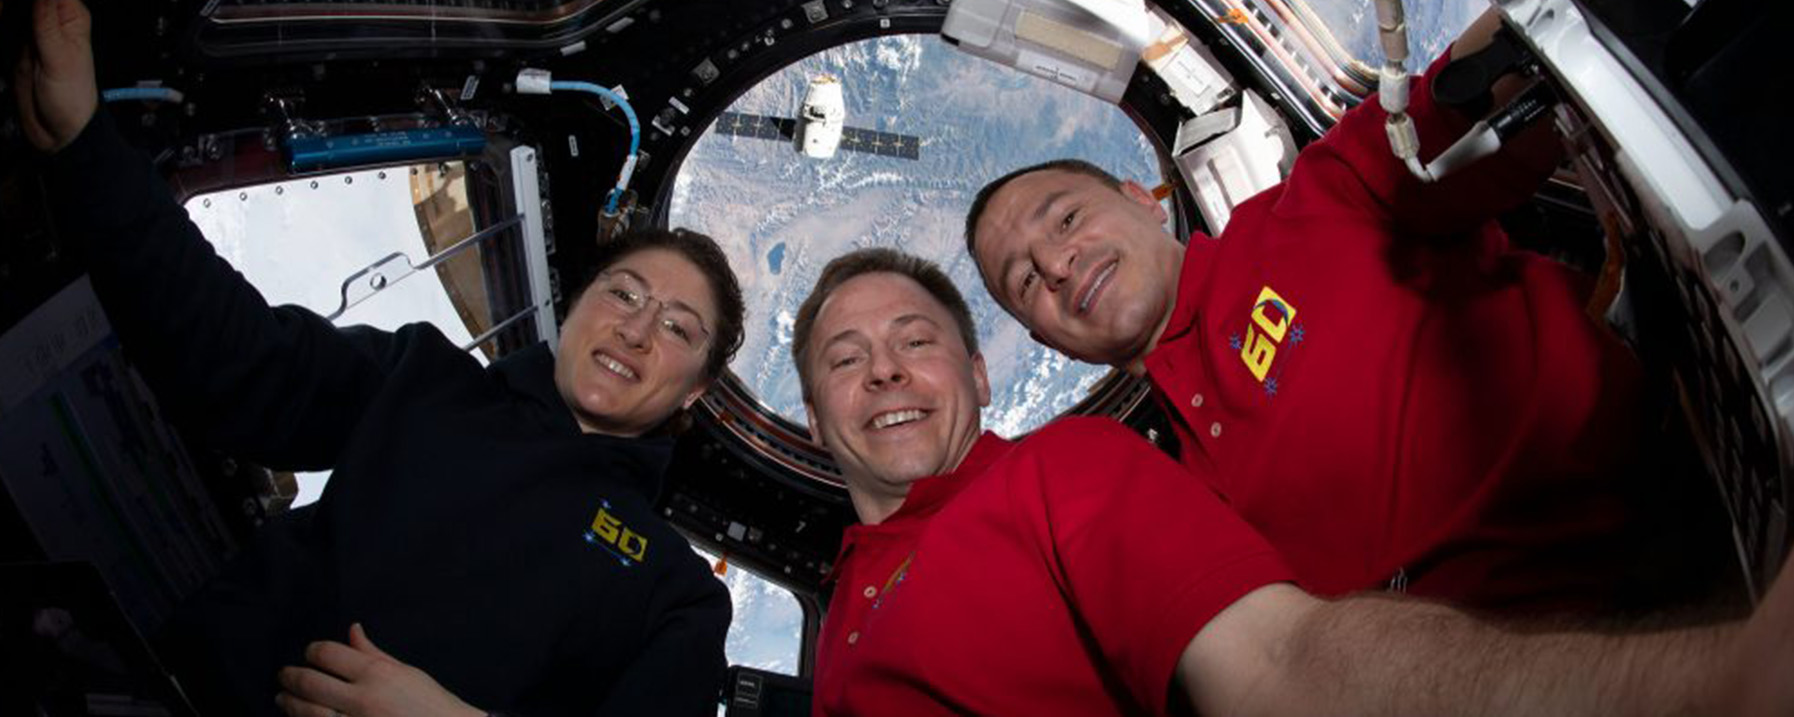 3 astronauts in space